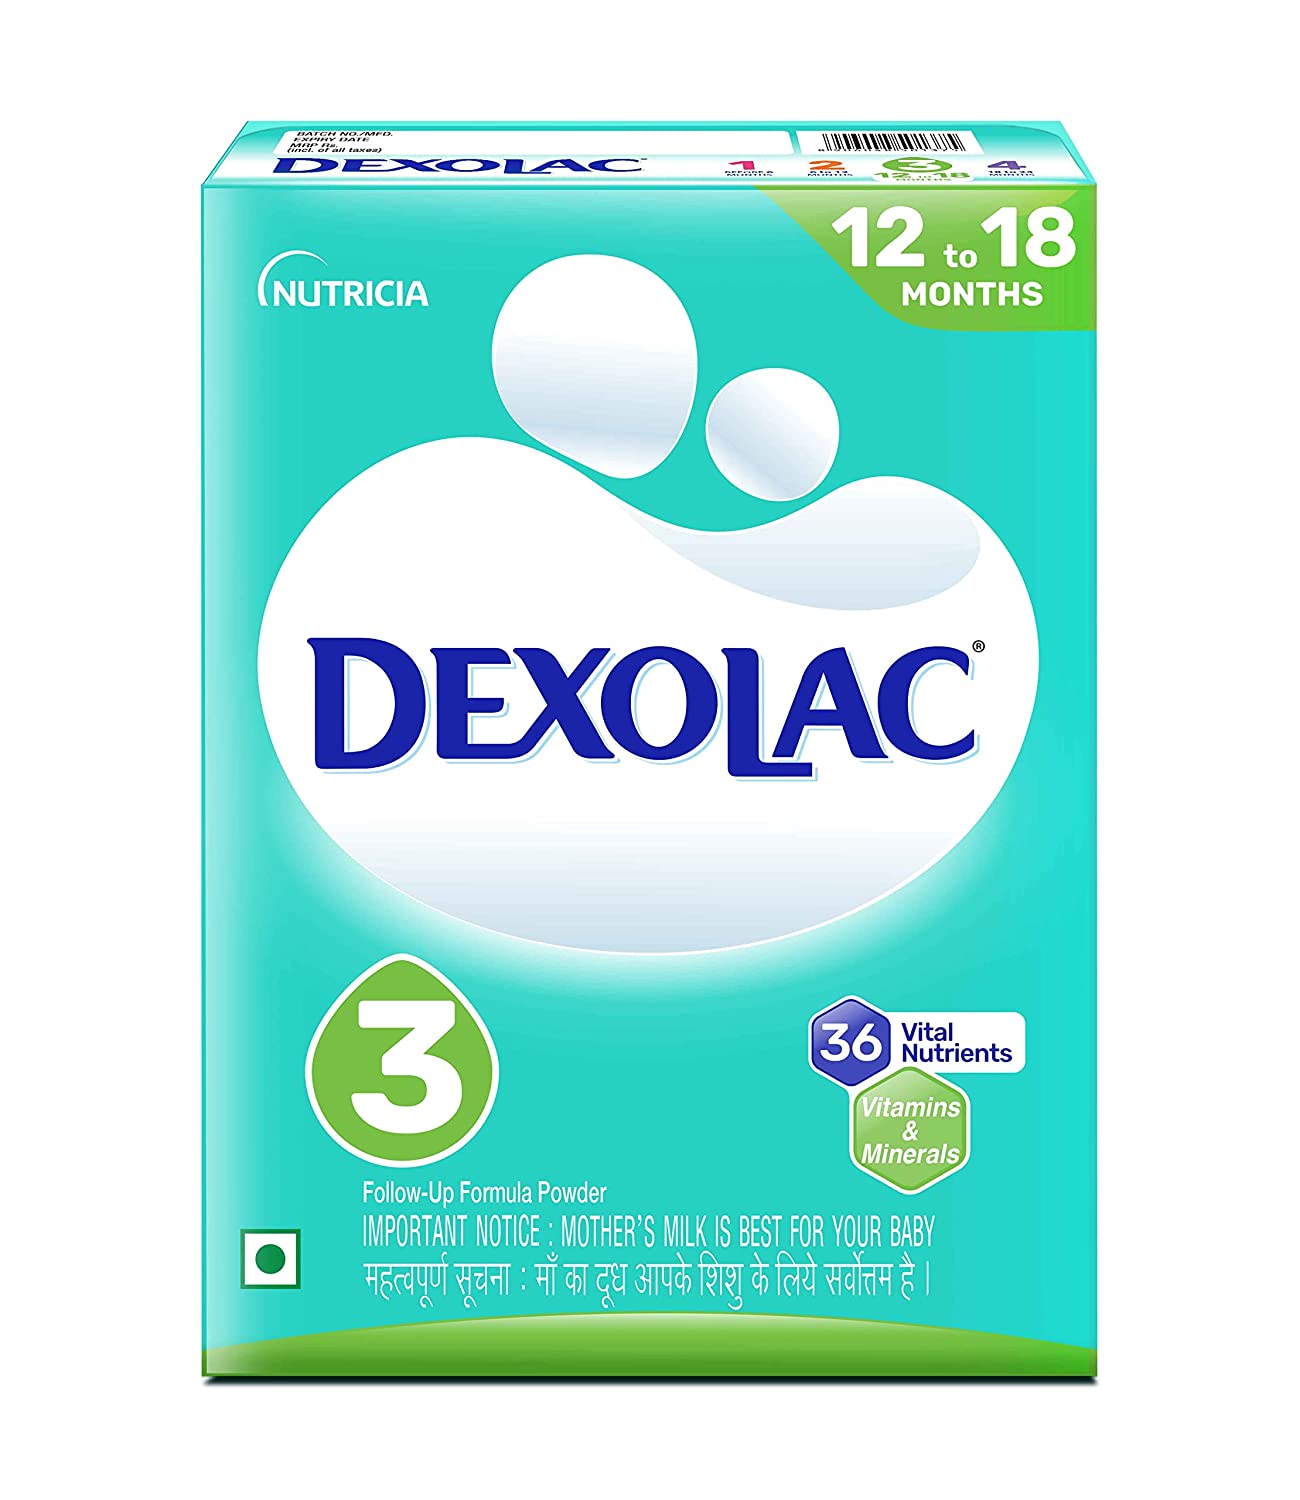 Dexolac Follow Up Infant Formula Milk with 36 Vital Nutrients Powder for Babies, Stage 3 (12 to 18 months) - 400gm, Dexolac Follow Up Infant Formula Milk with 36 Vital Nutrients Powder for Babies,